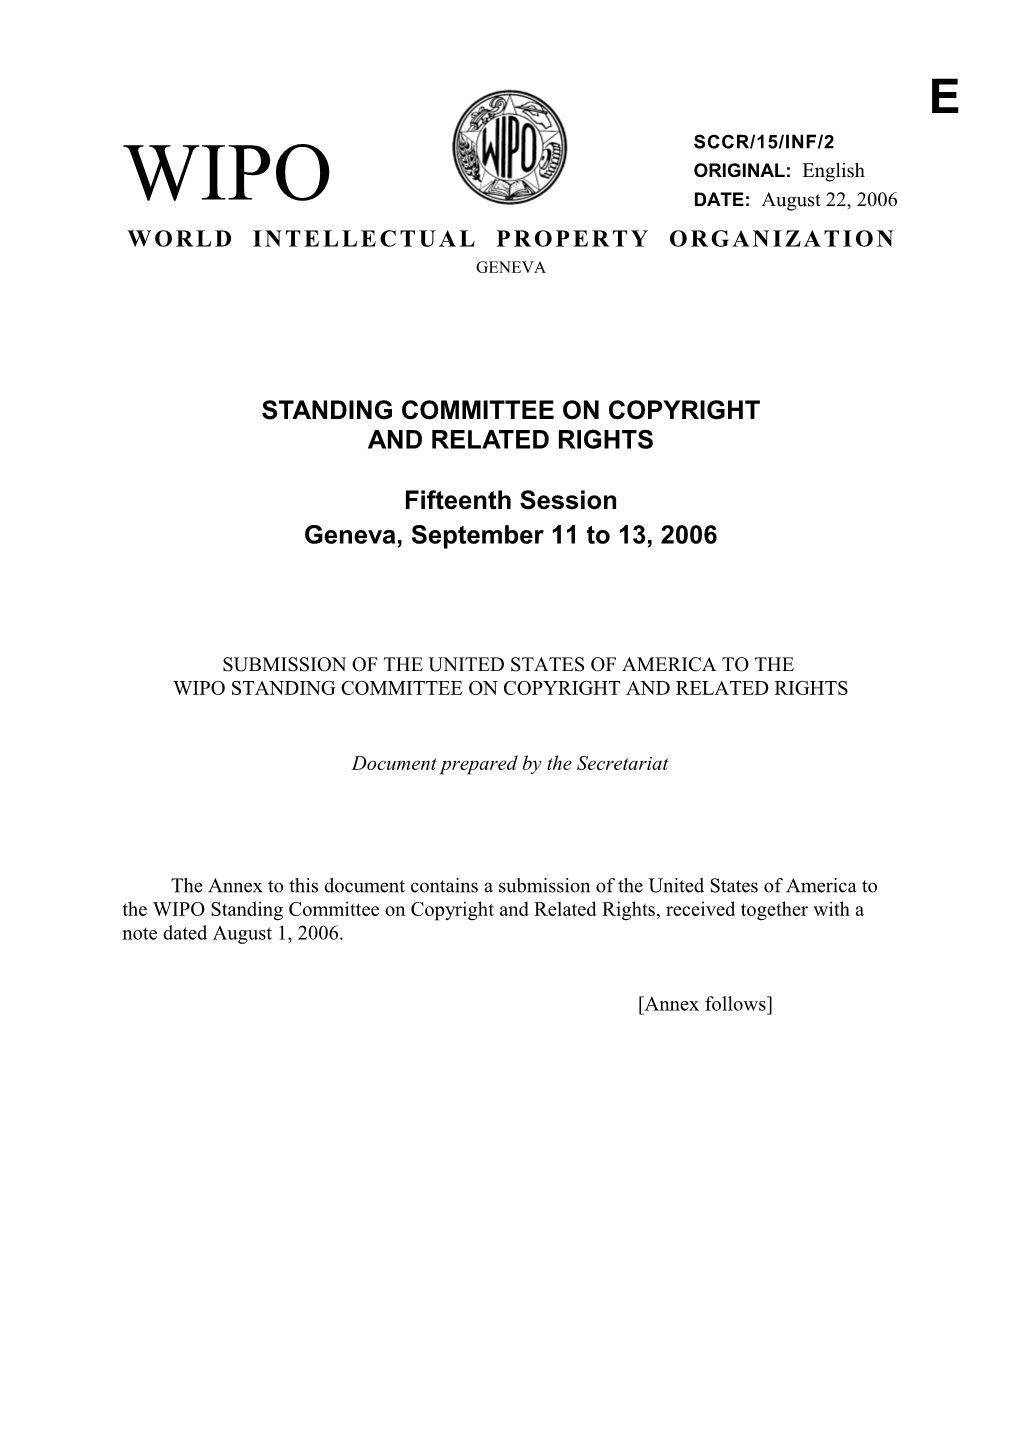 SCCR/15/INF/2: Submission of the United States of America to the WIPO Standing Committee